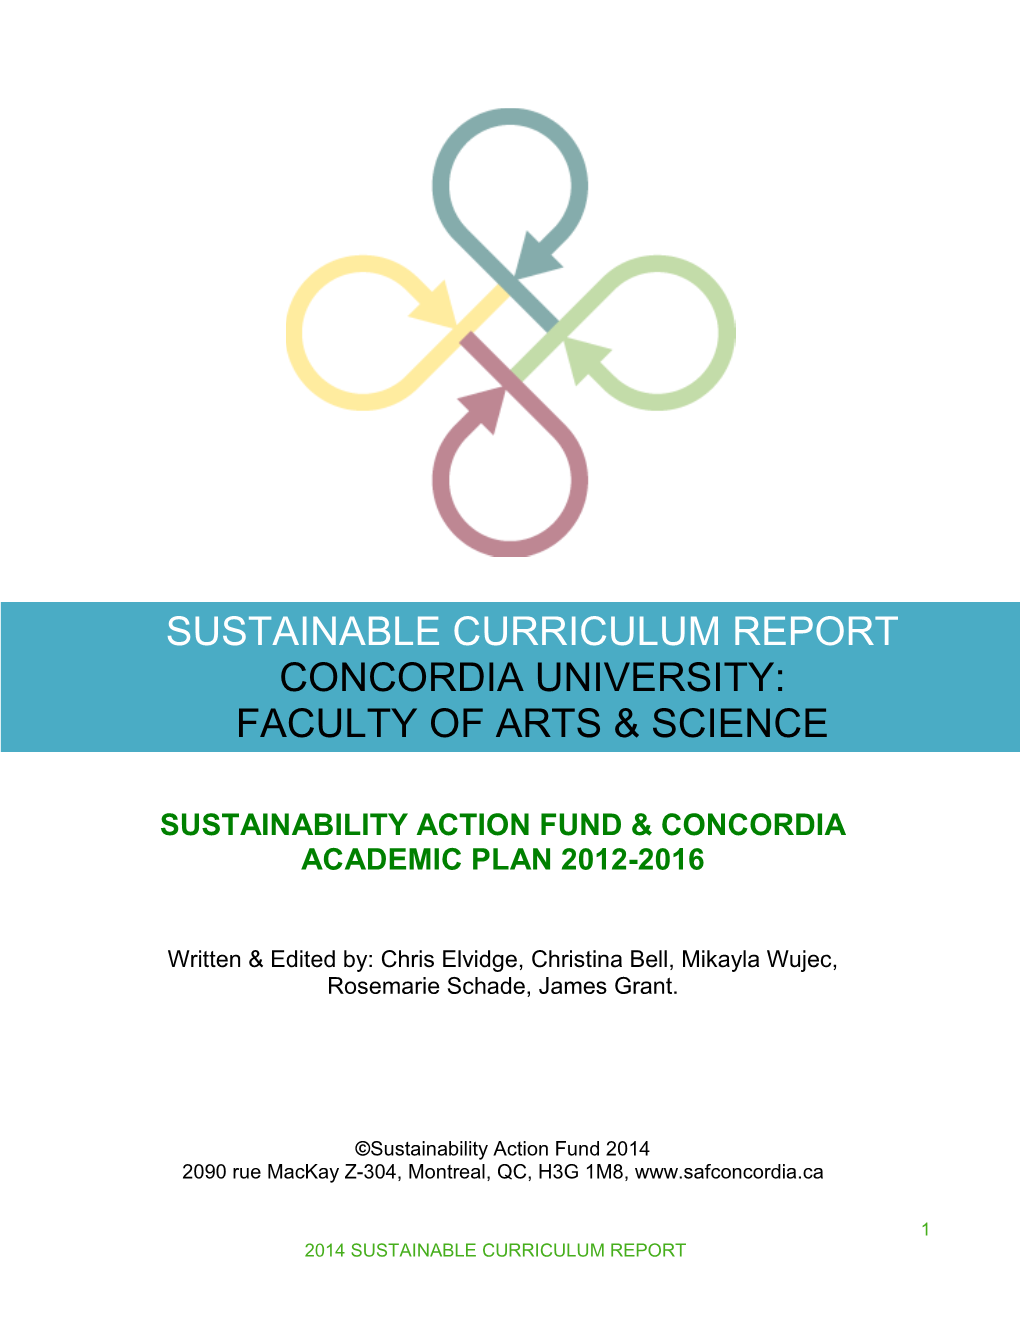 Sustainable Curriculum Report Concordia University: Faculty of Arts & Science